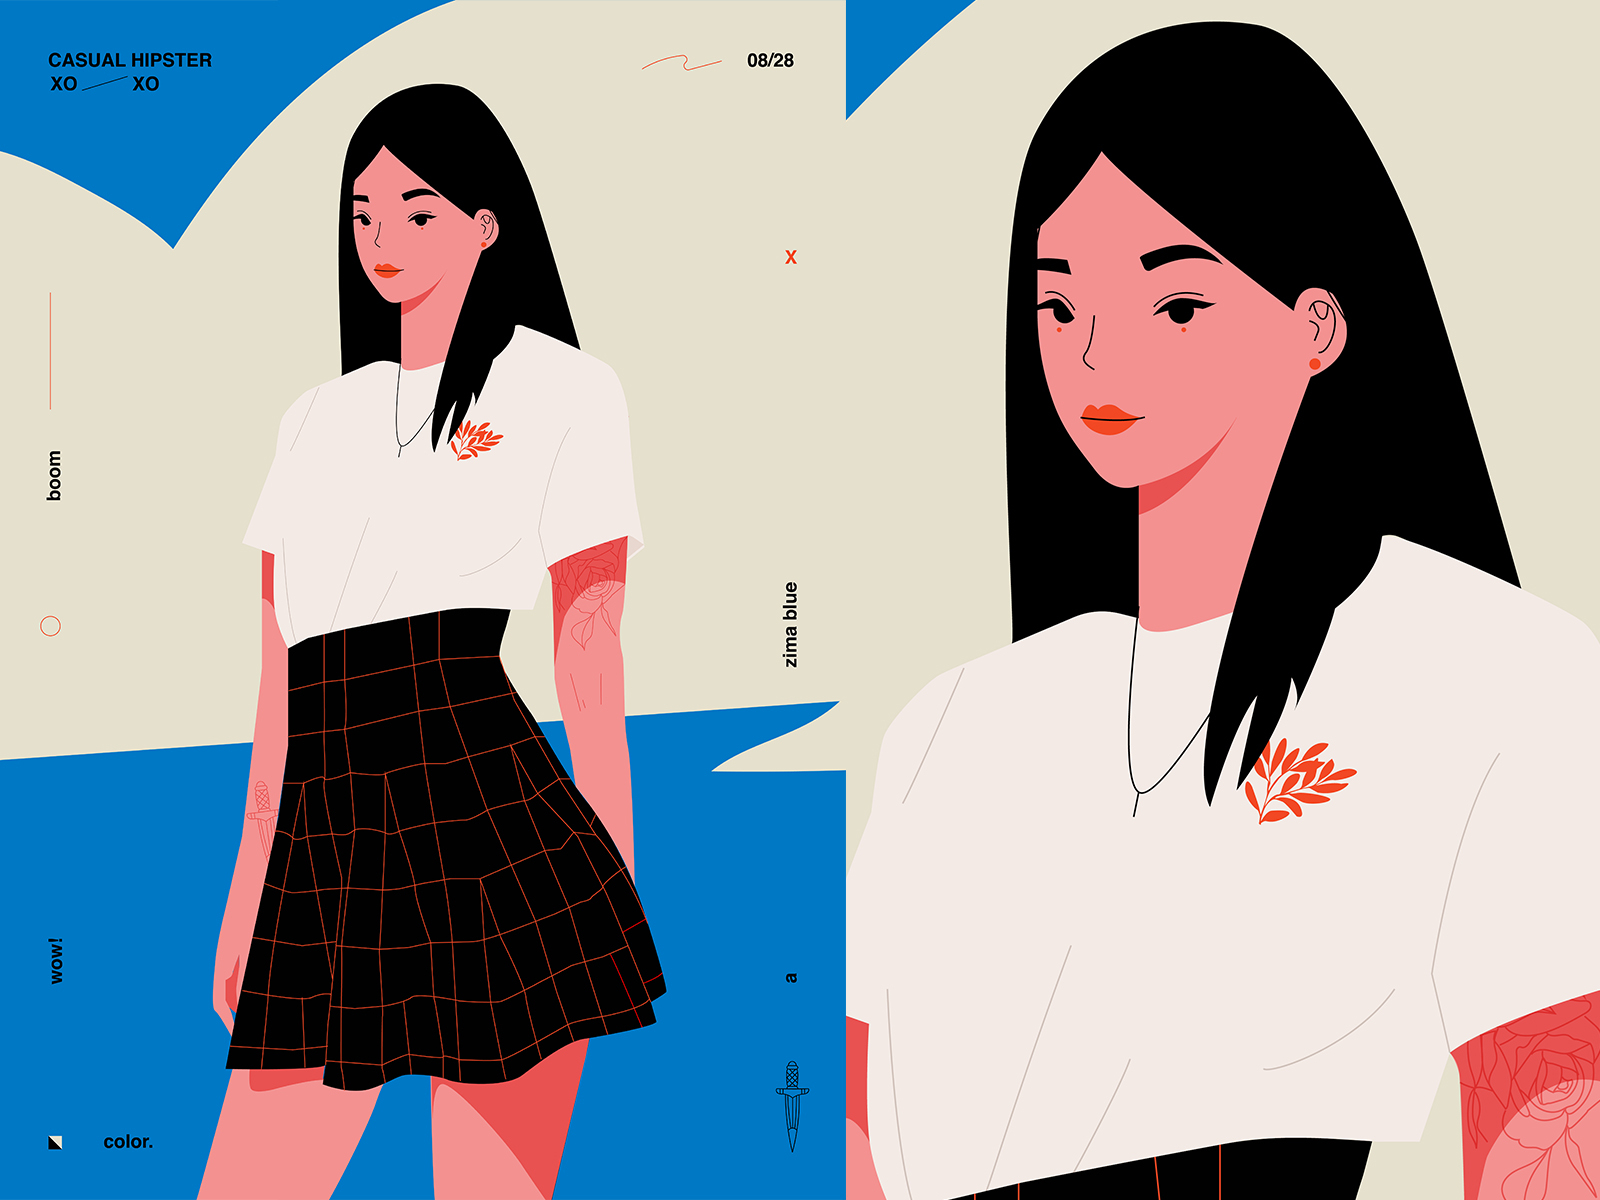 She is a casual hipster abstract character design character illustration clean composition girl girl character girl illustration grid hipster illustration layout lines minimal poster art sexy girl tattoo